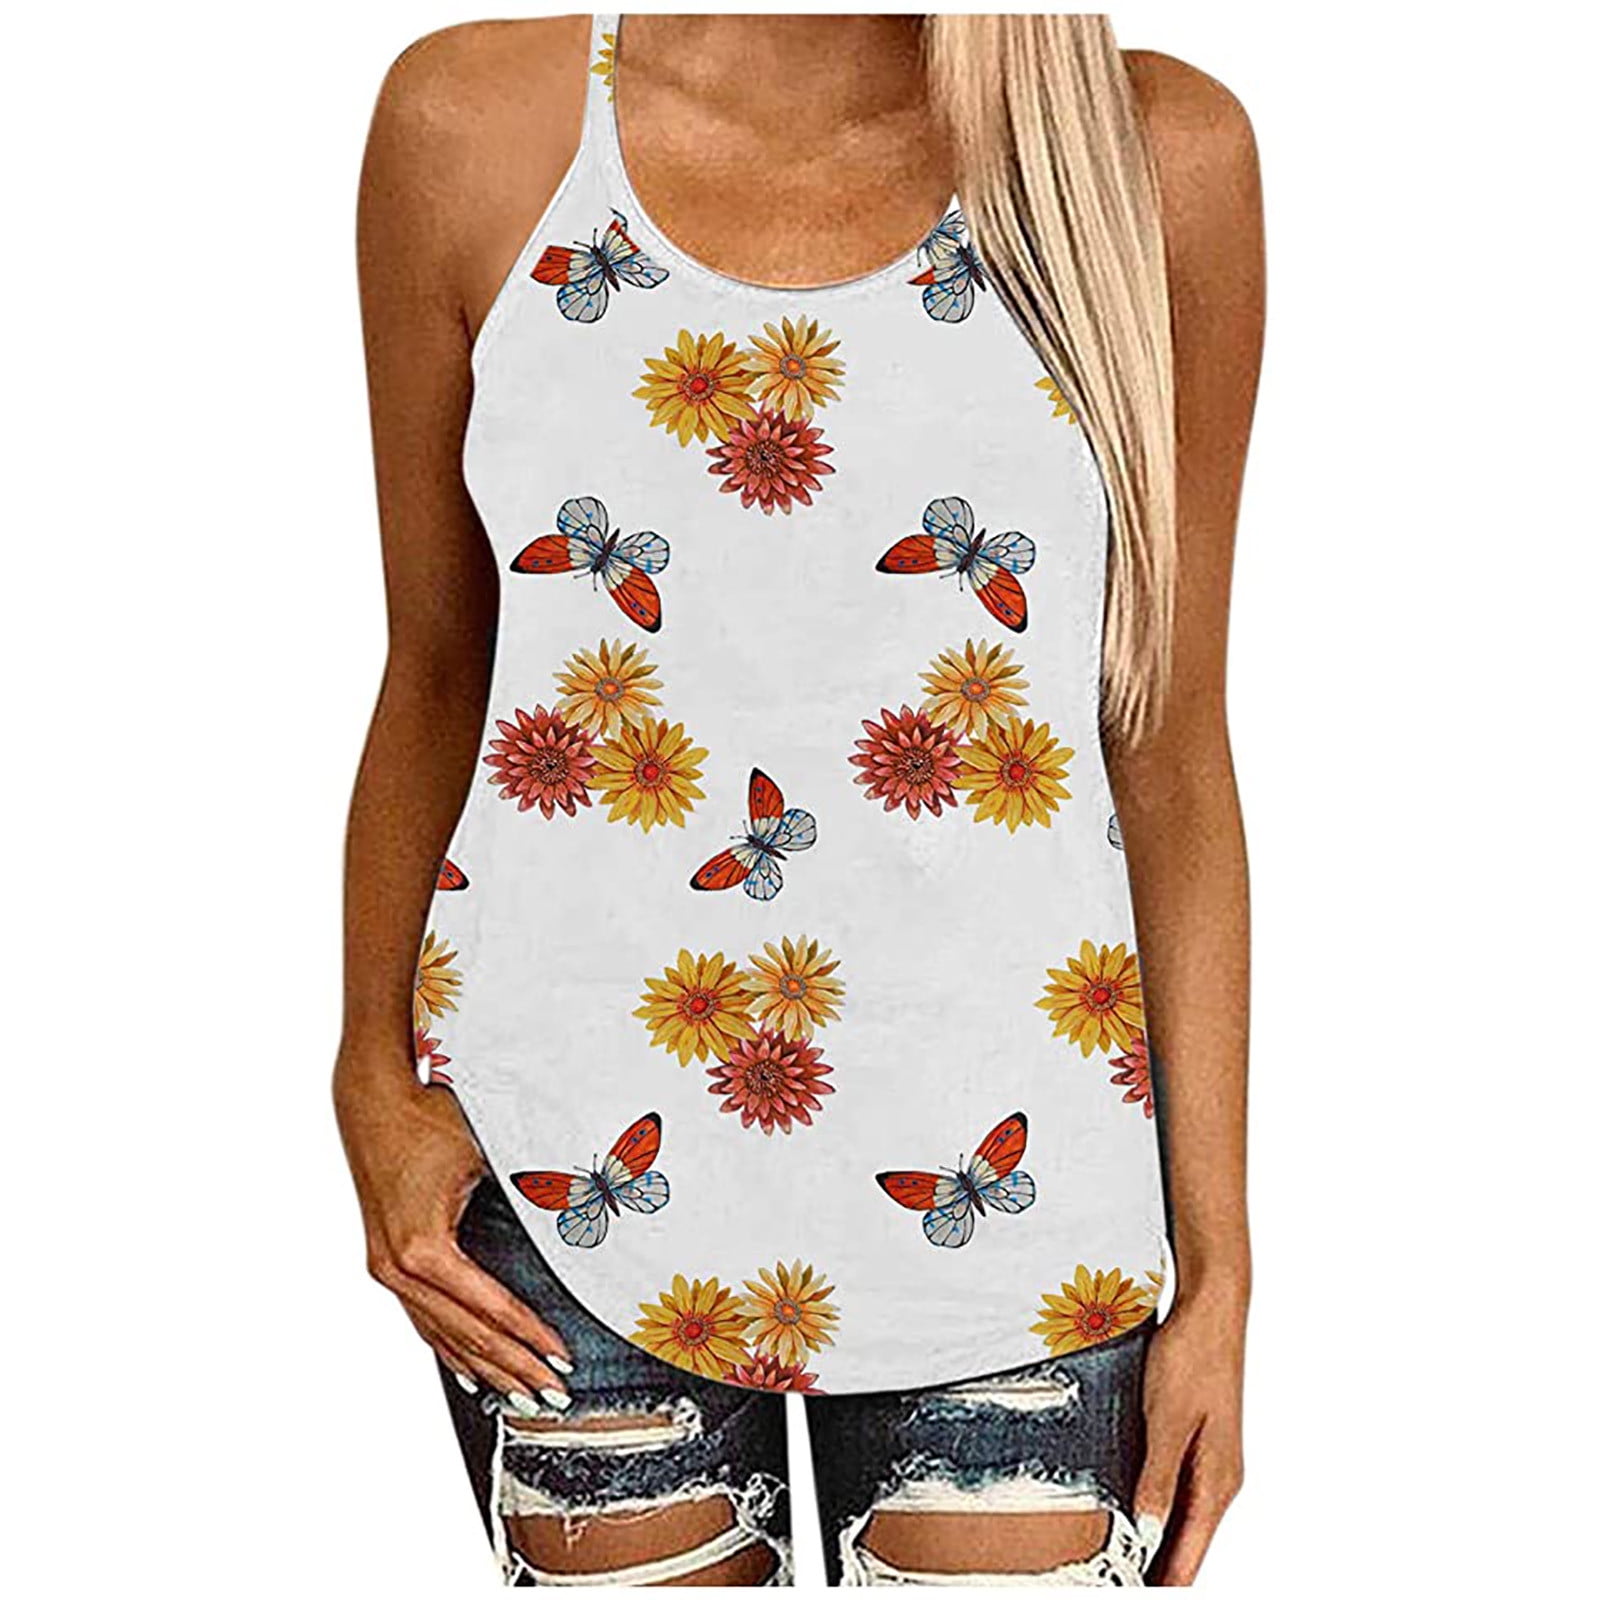 Simple Casual Womens Ladies Sleeveless O-Neck Vest Flowers Print Tank Top Blouse